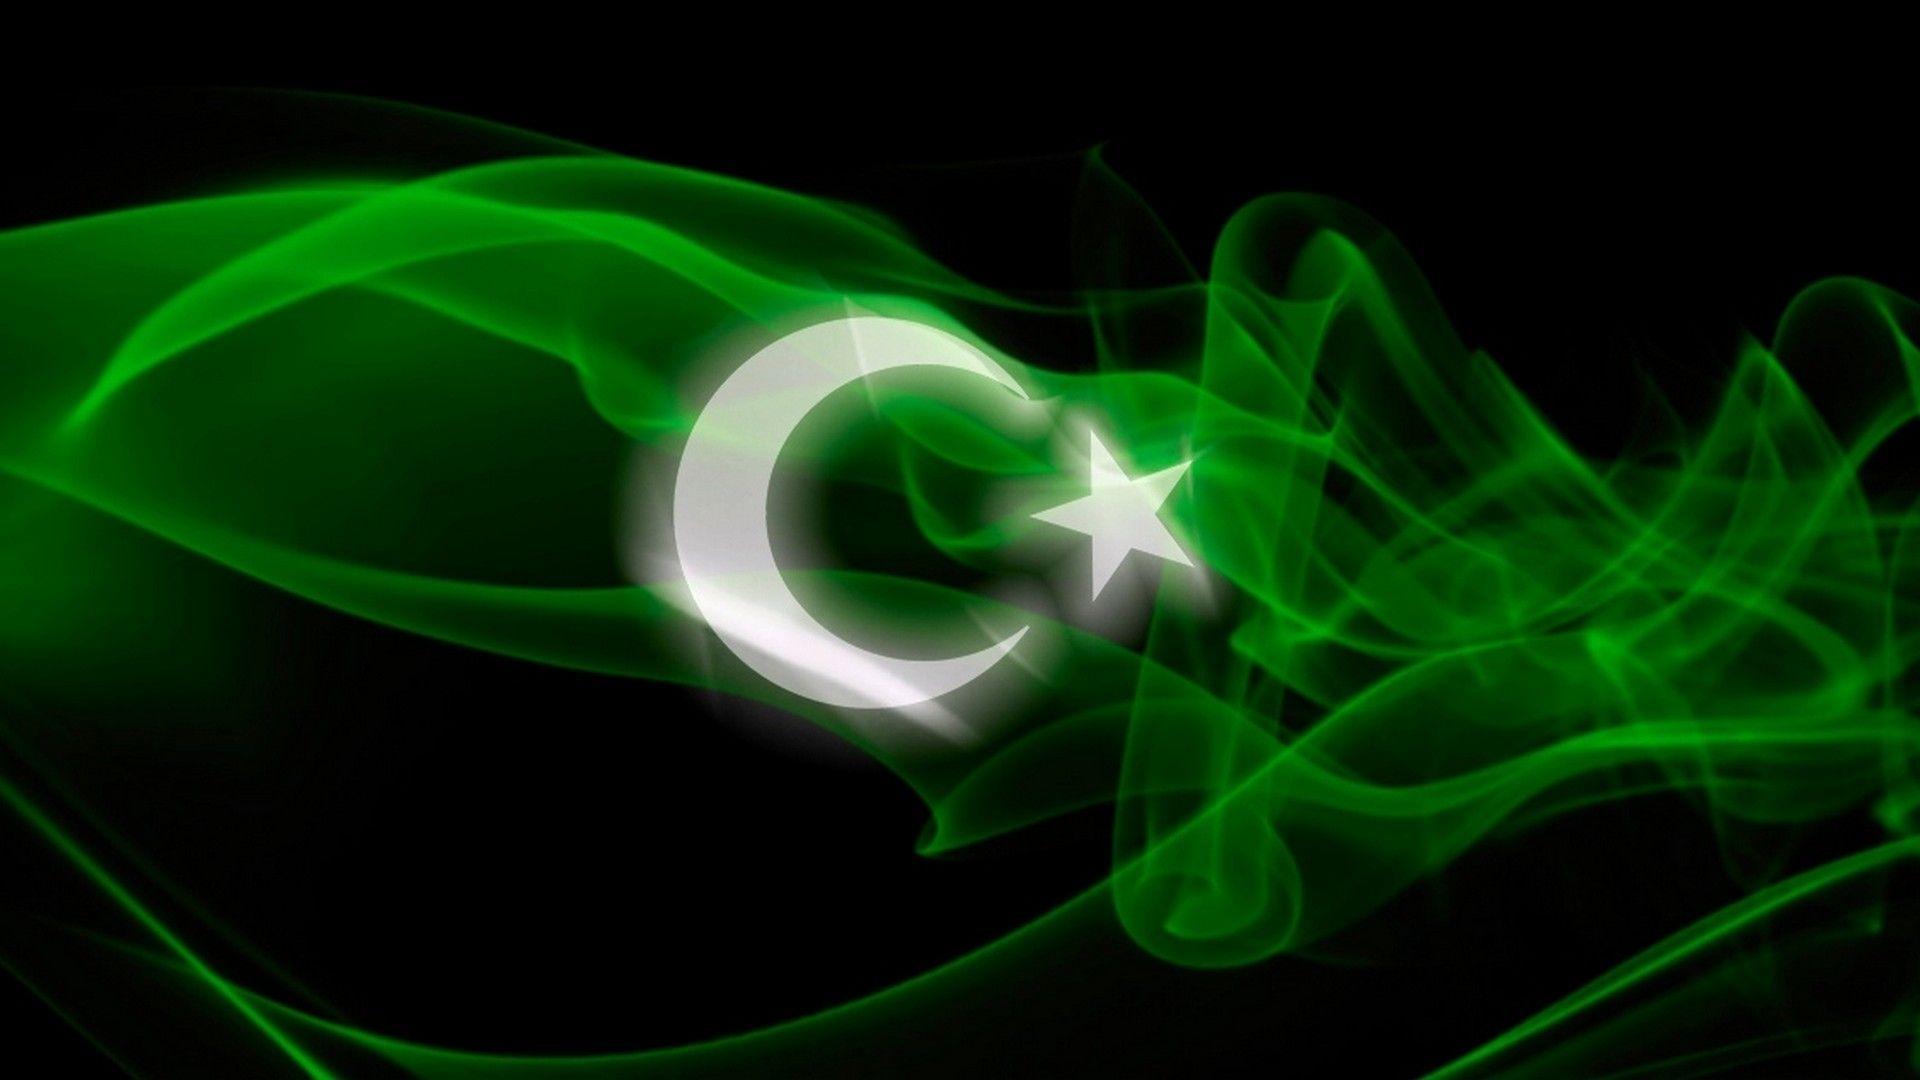 Pakistani Flag Wallpapers Hd Pictures.